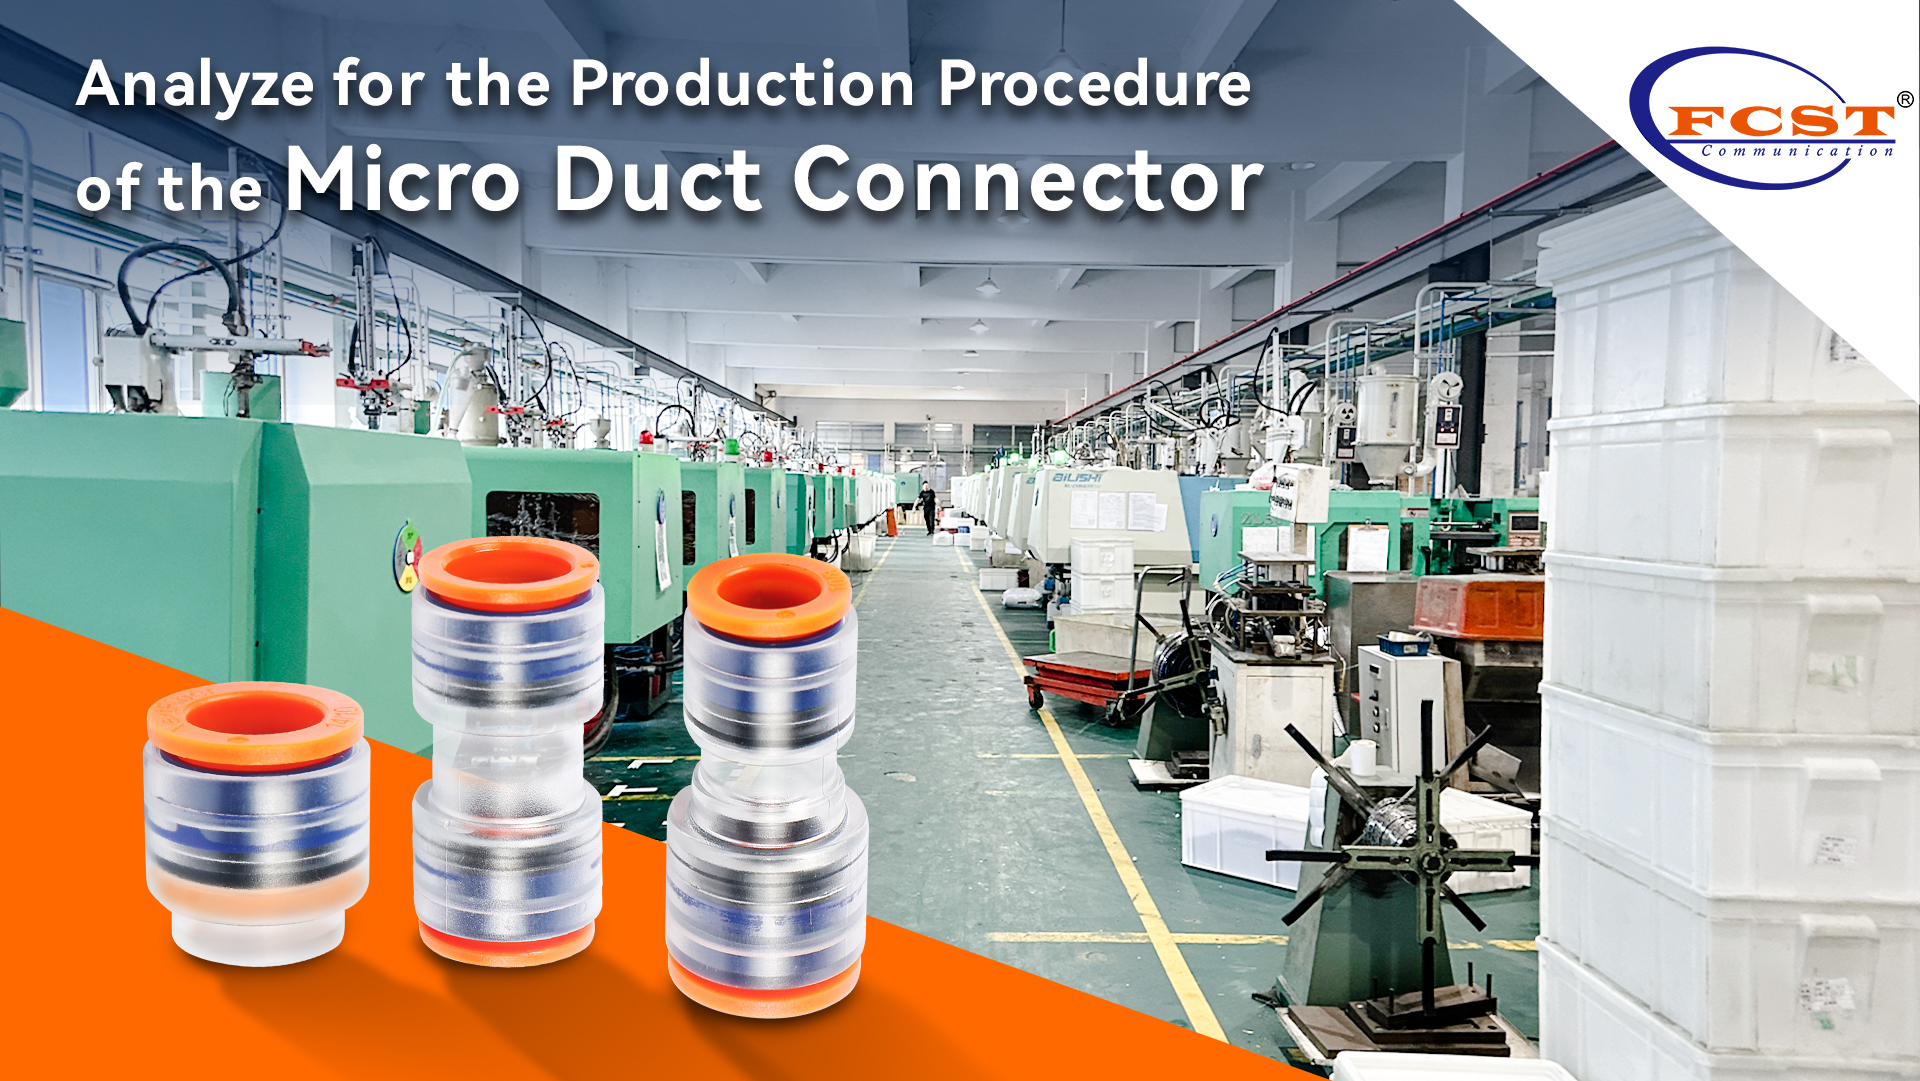 Analyze for the Production Procedure of the Micro Duct Connector